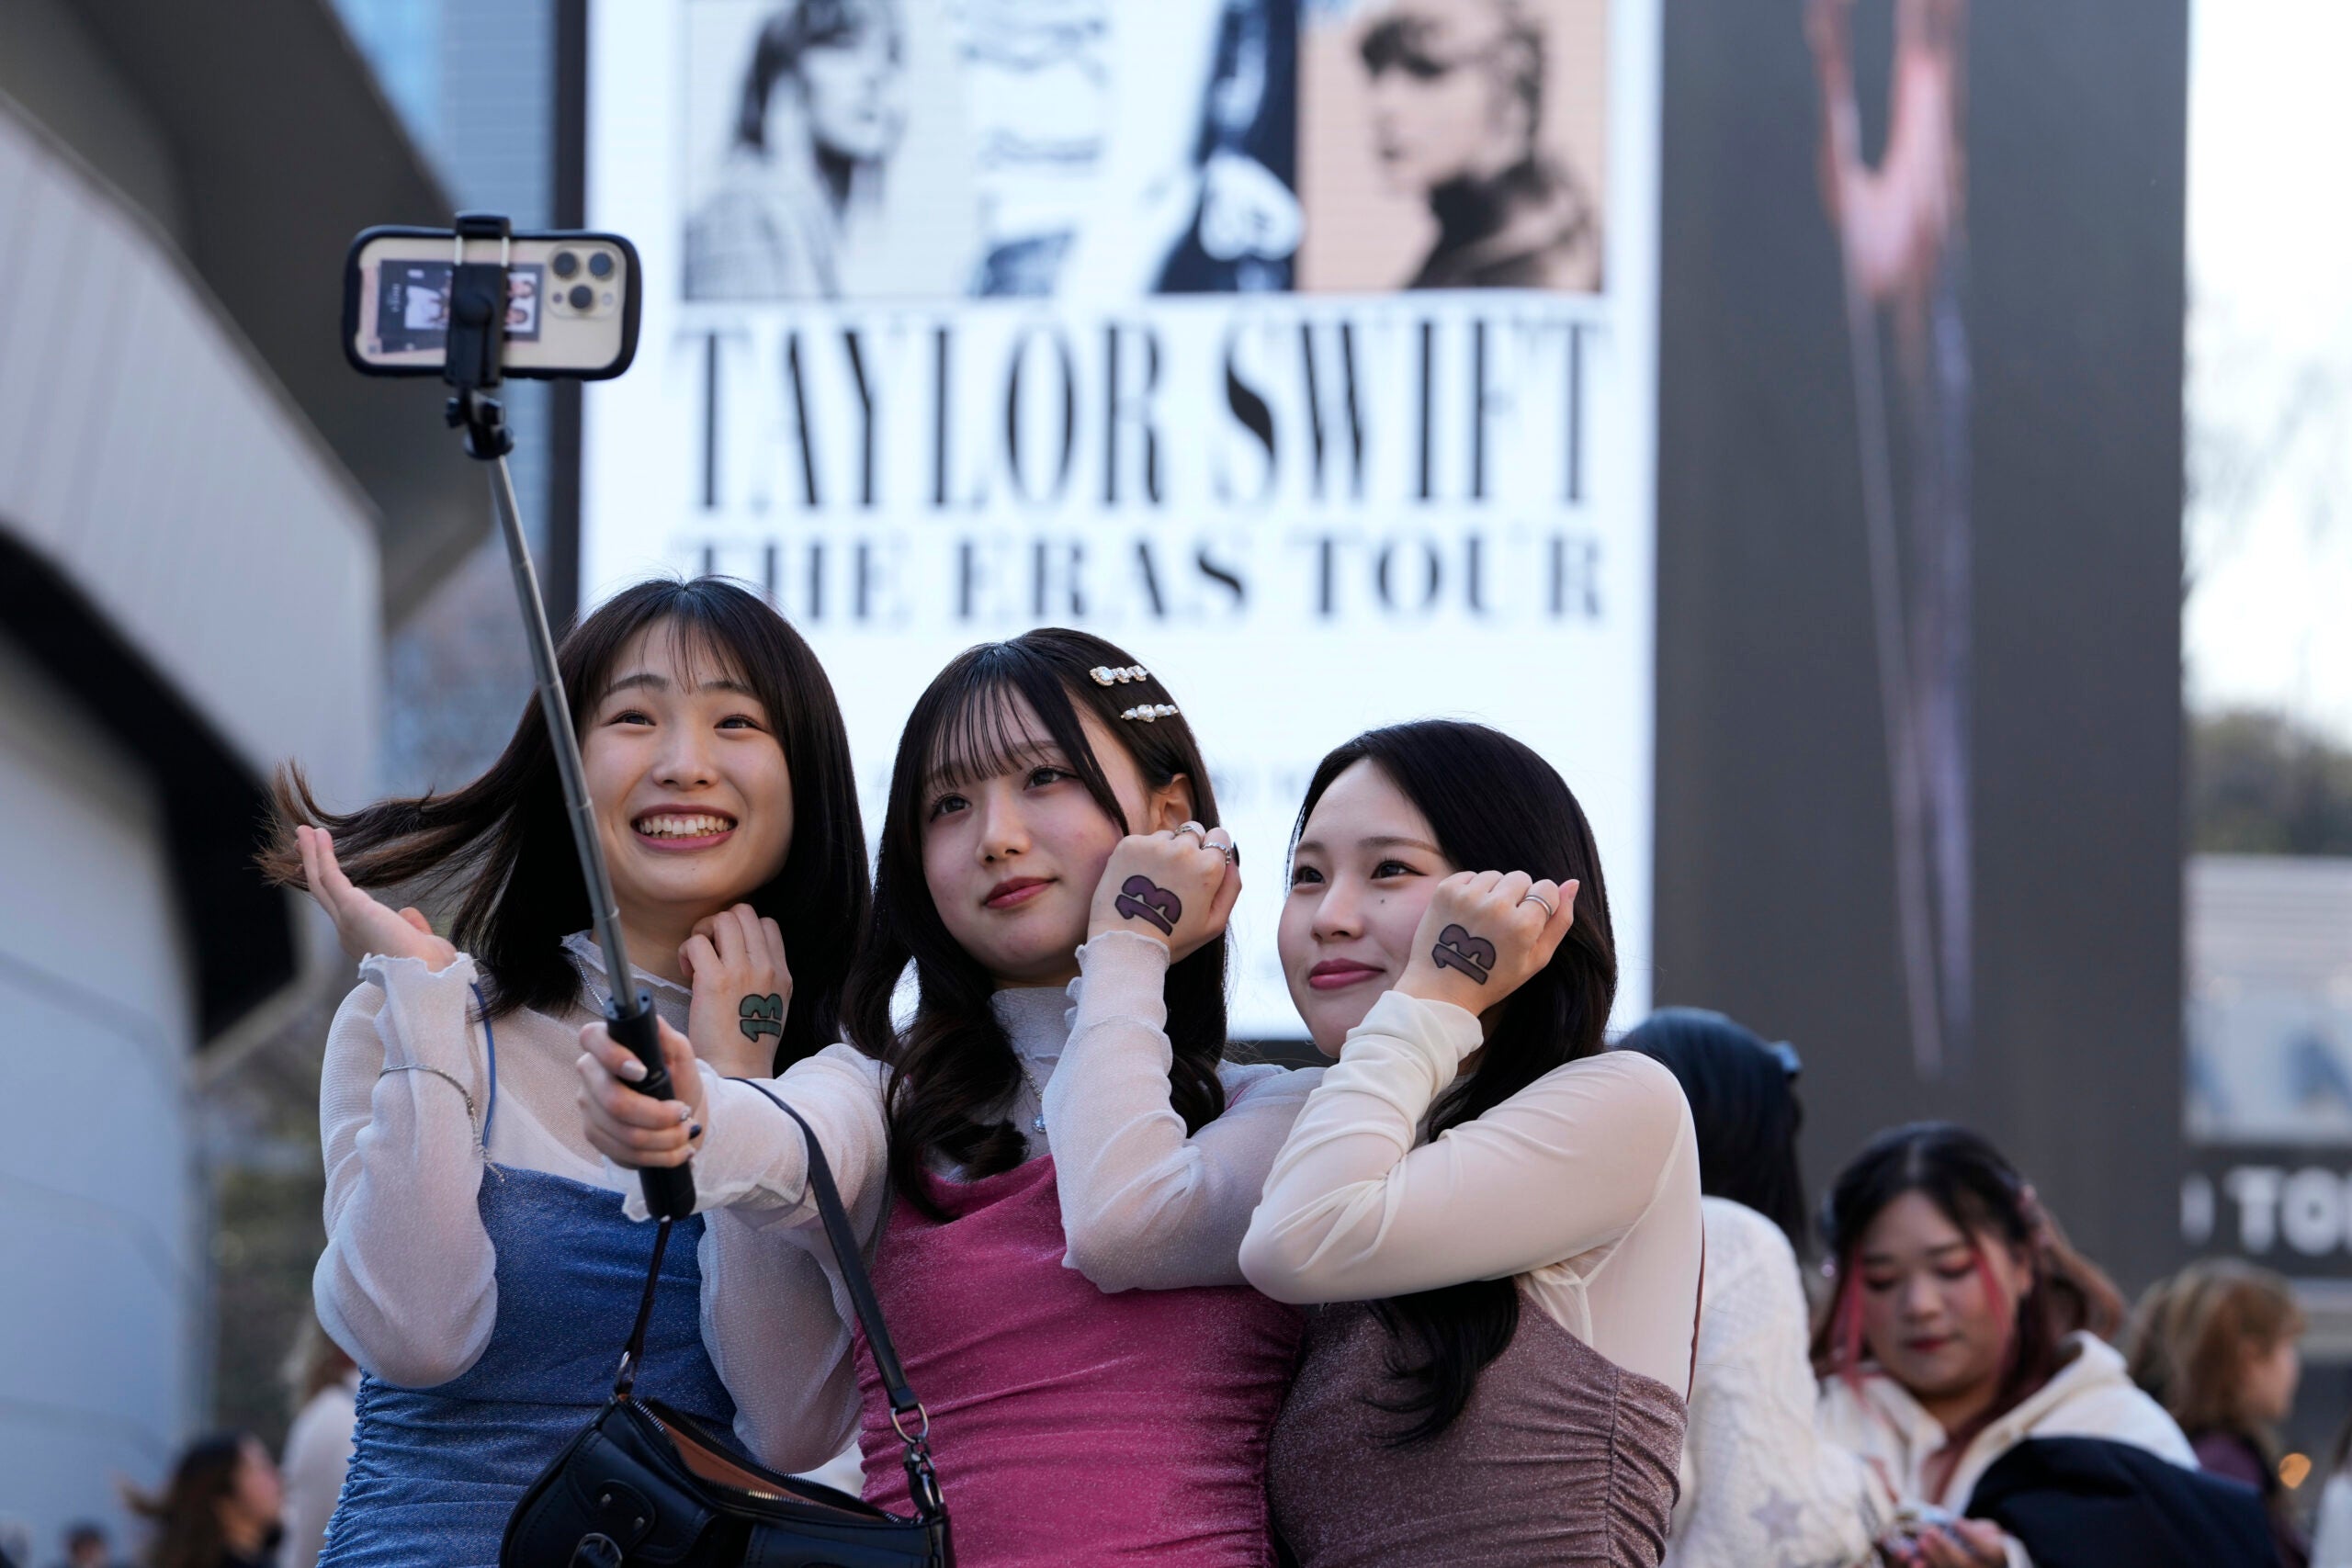 This is like our Super Bowl': Thousands of Taylor Swift fans line up for  merchandise